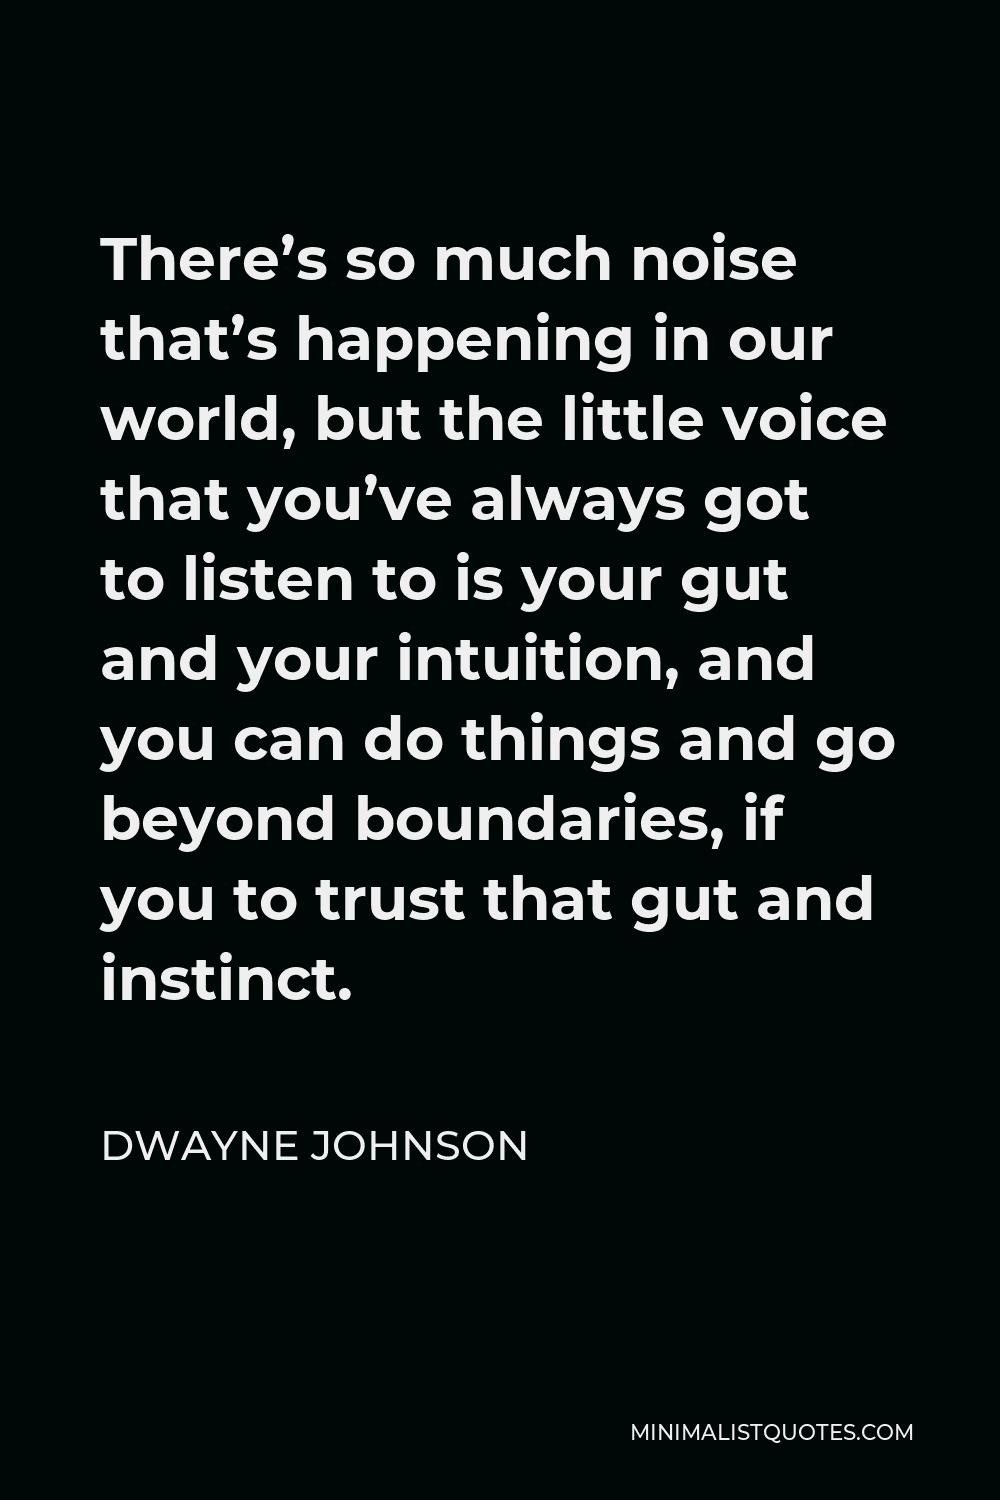 Dwayne Johnson Quote - There’s so much noise that’s happening in our world, but the little voice that you’ve always got to listen to is your gut and your intuition, and you can do things and go beyond boundaries, if you to trust that gut and instinct.